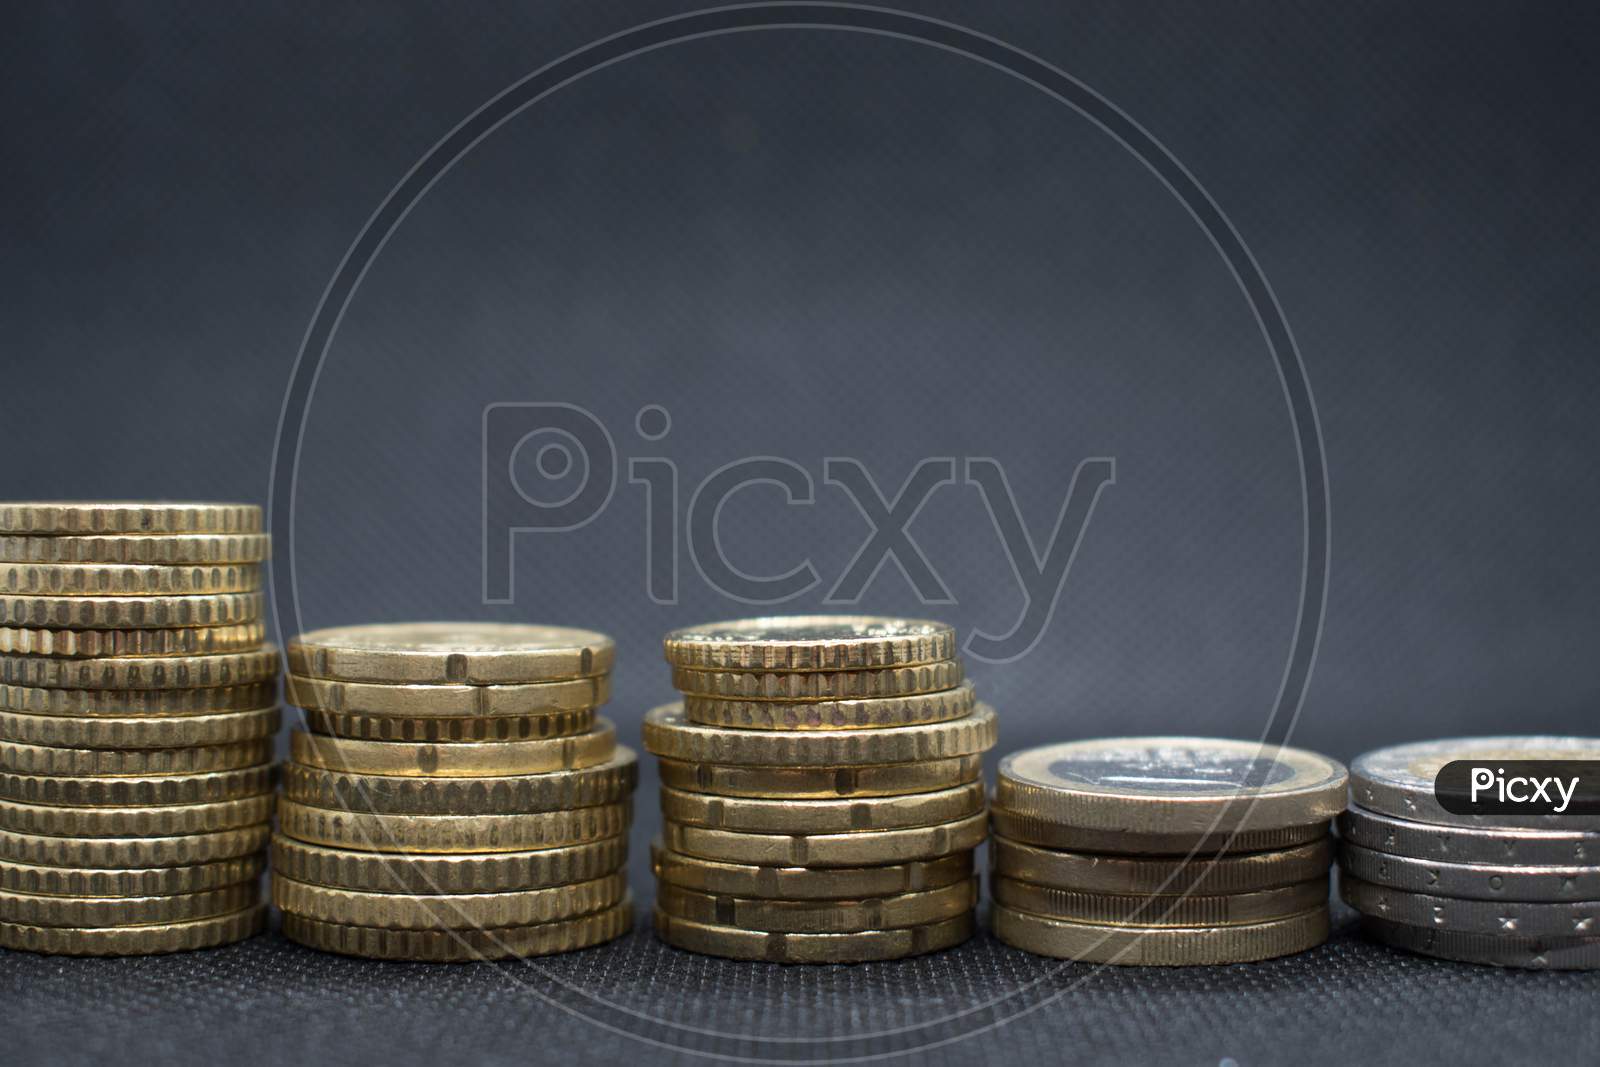 Euro Coins Stacks On Black Background In Different Positions.Euro Coins Stacked In Different Combinations